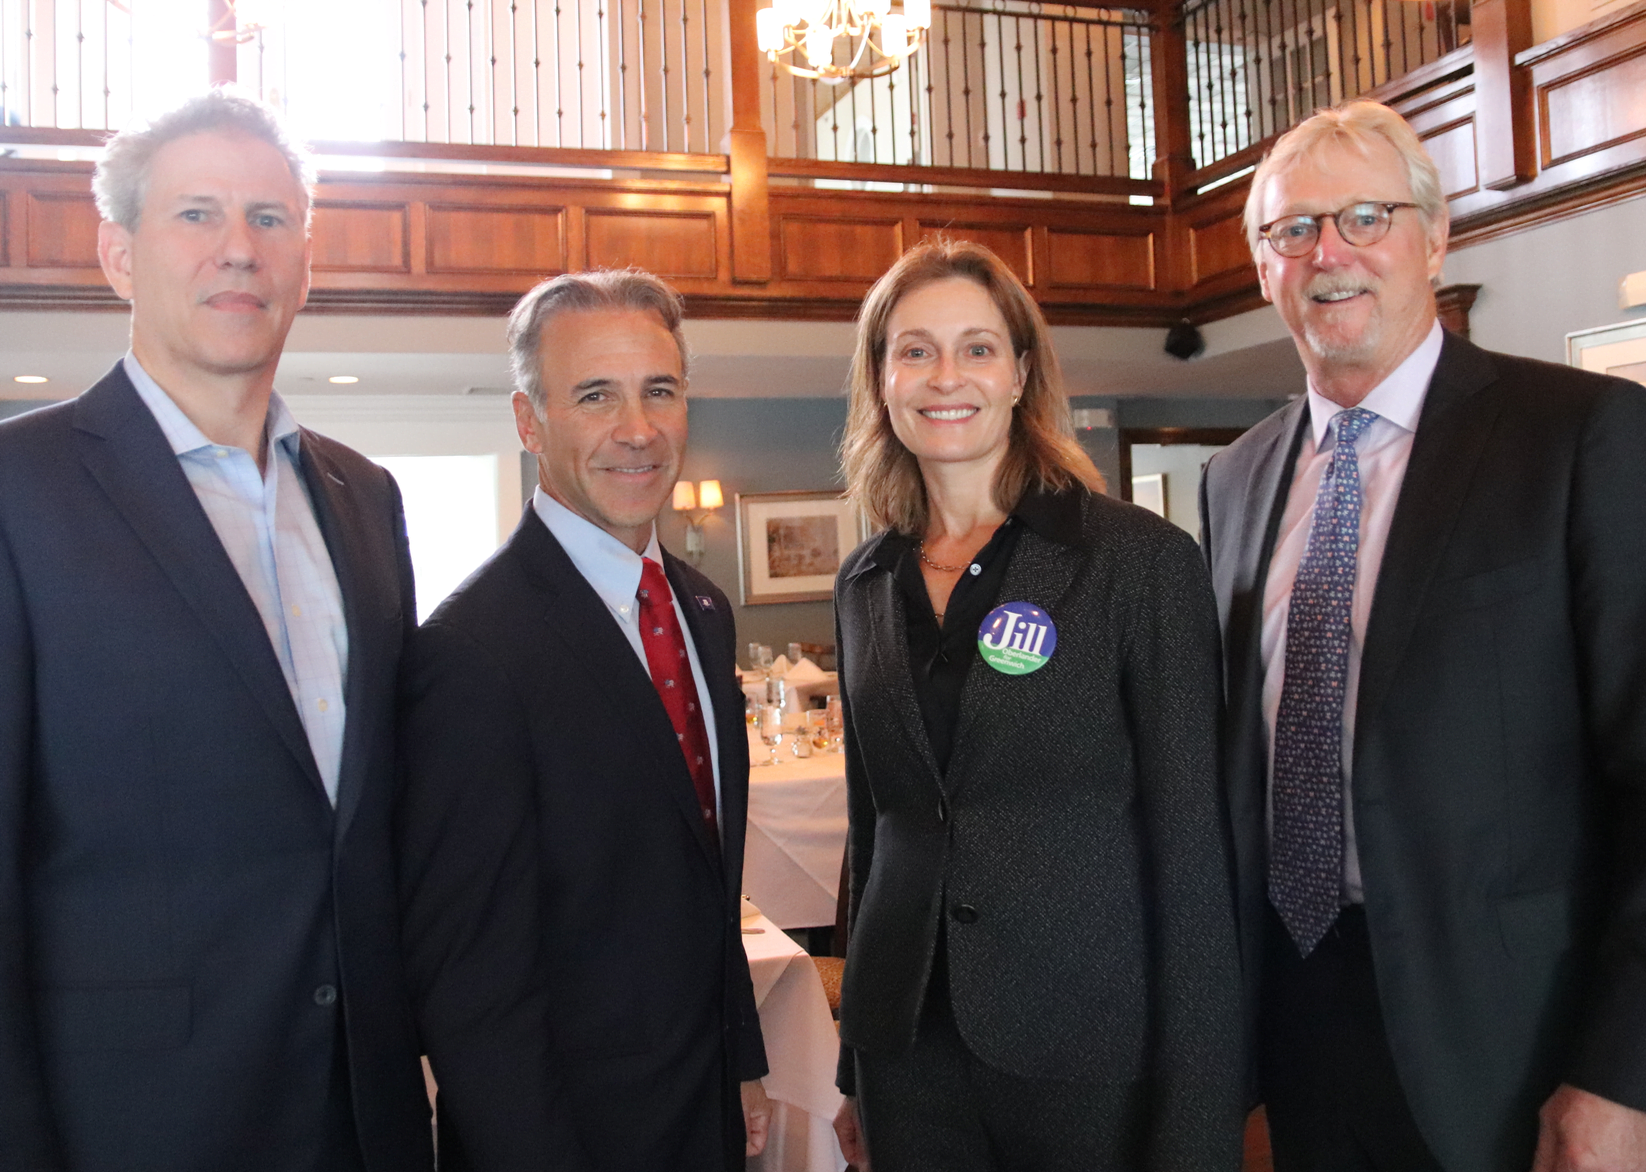 Matt Barnum, Fred Camillo, Jill Oberlander and Peter Carlson at the Greenwich Water Club's forum for First Selectman Candidates. Oct 17, 2019 Photo: Leslie Yager